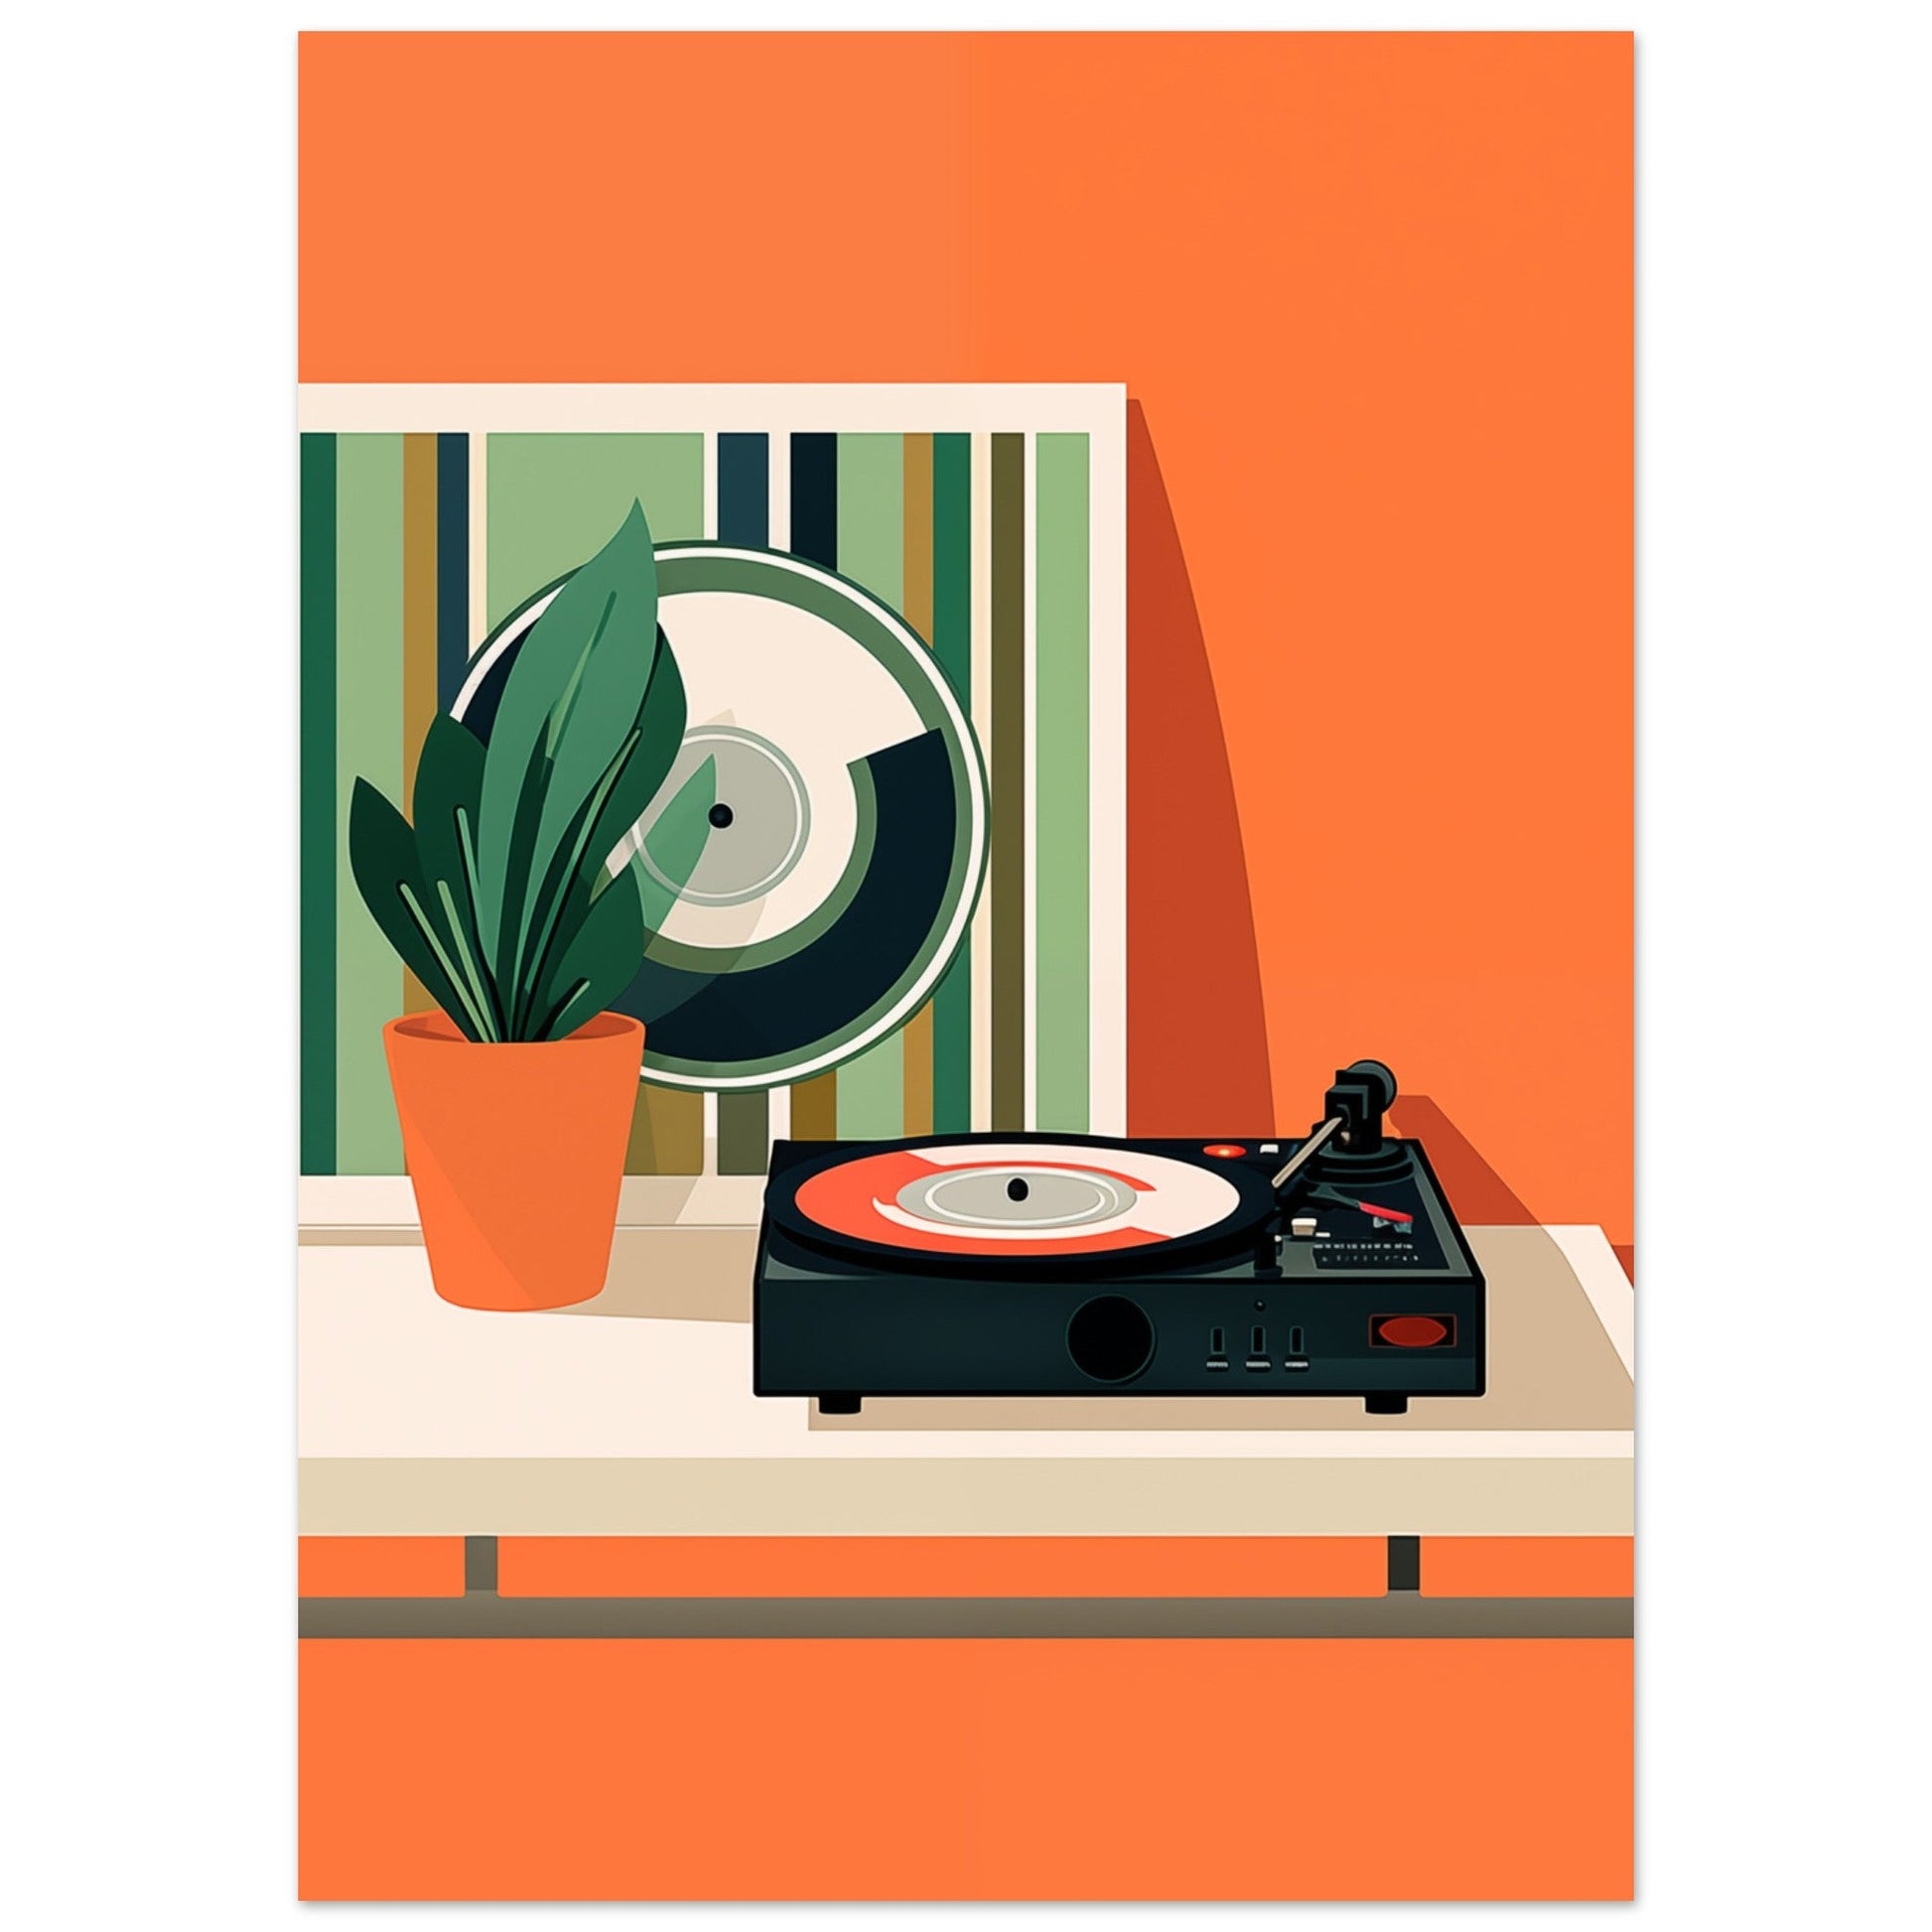 A high-quality Needle & Leaf featuring a turntable and a plant on a Pop Art orange background.